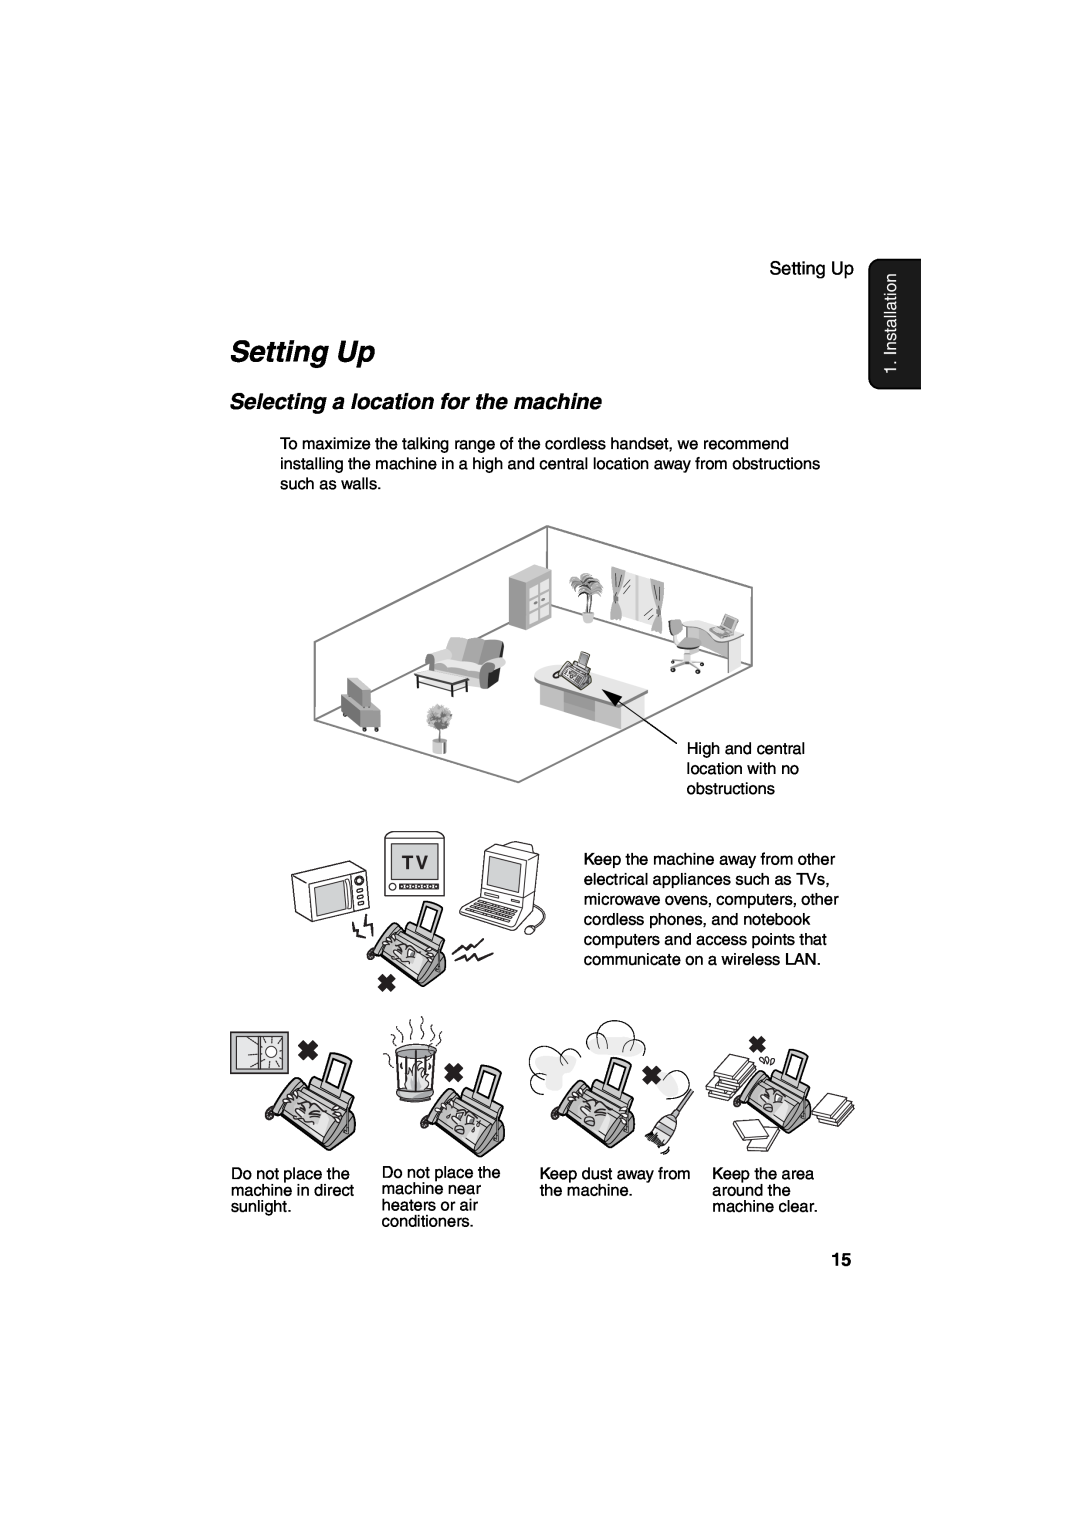 Sharp UX-CD600 operation manual Setting Up, Selecting a location for the machine, Installation 